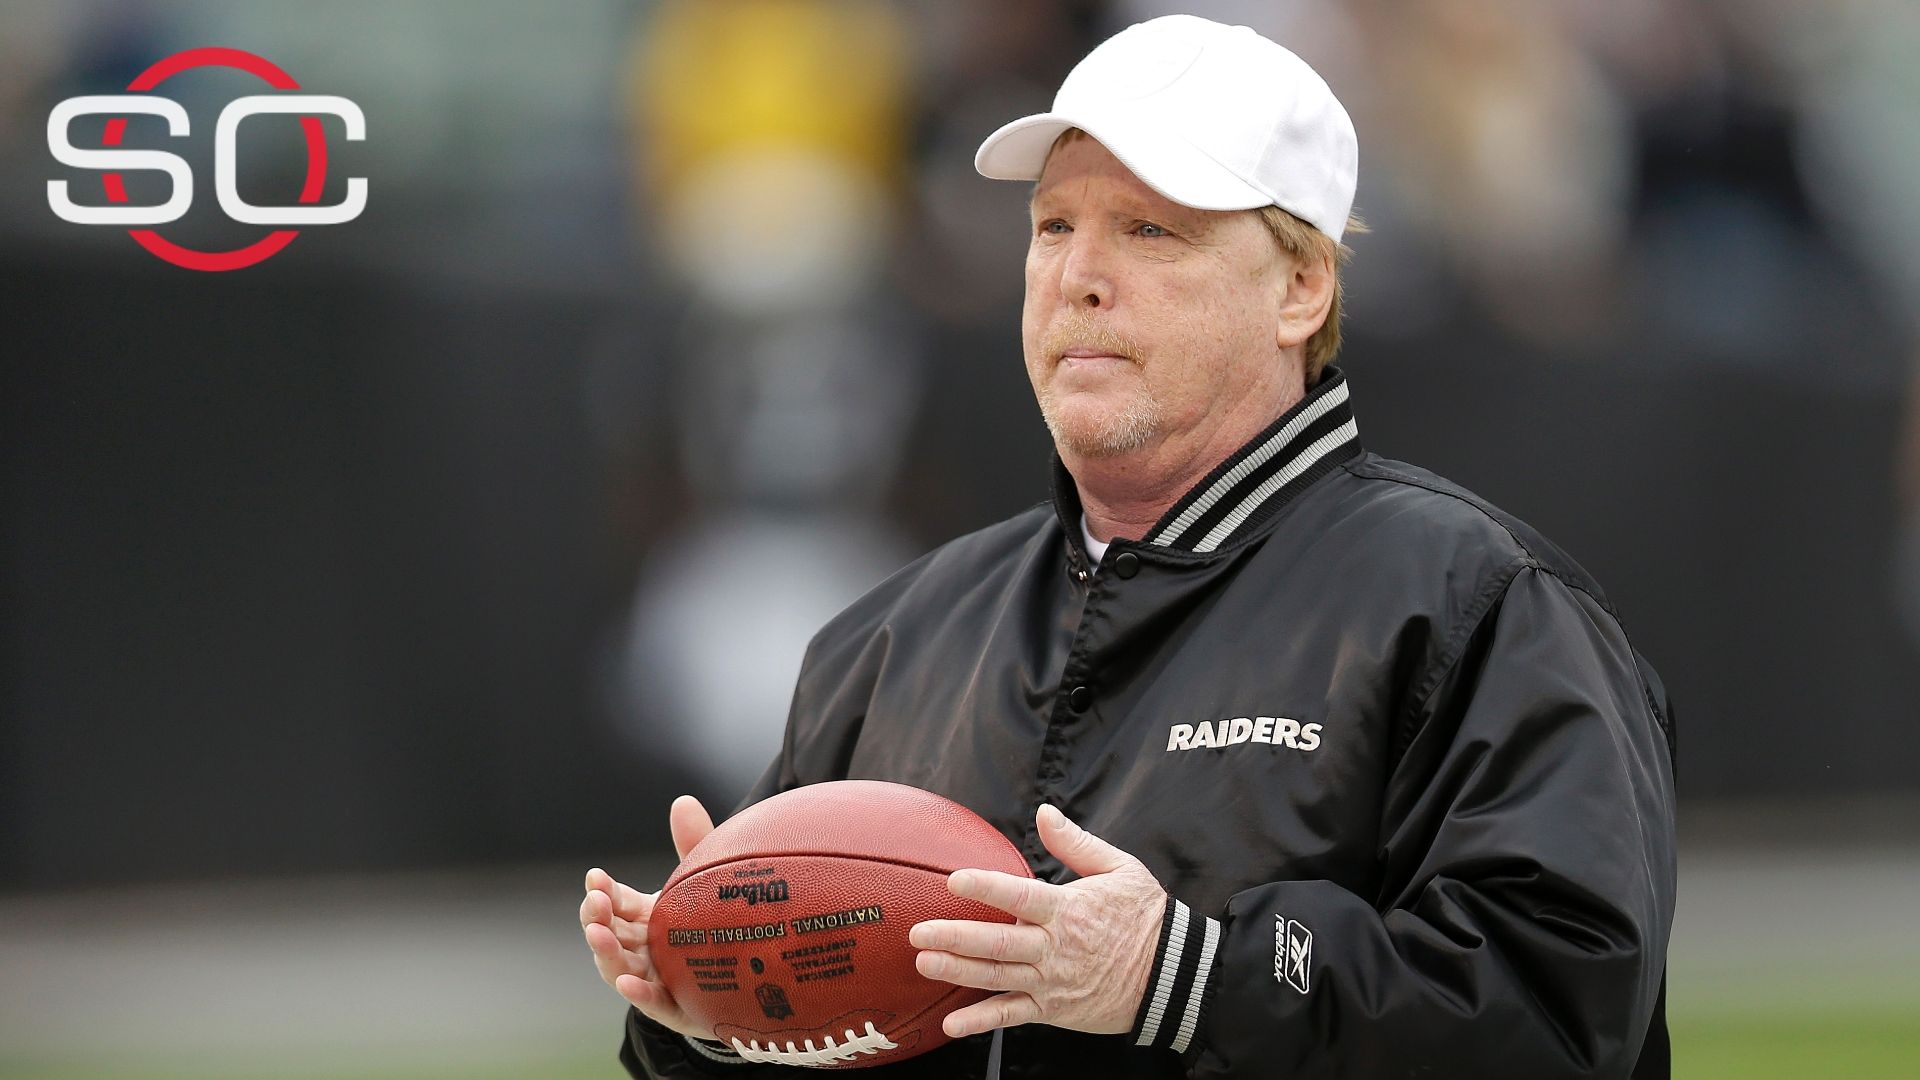 Will Raiders stay in Oakland beyond 2016?